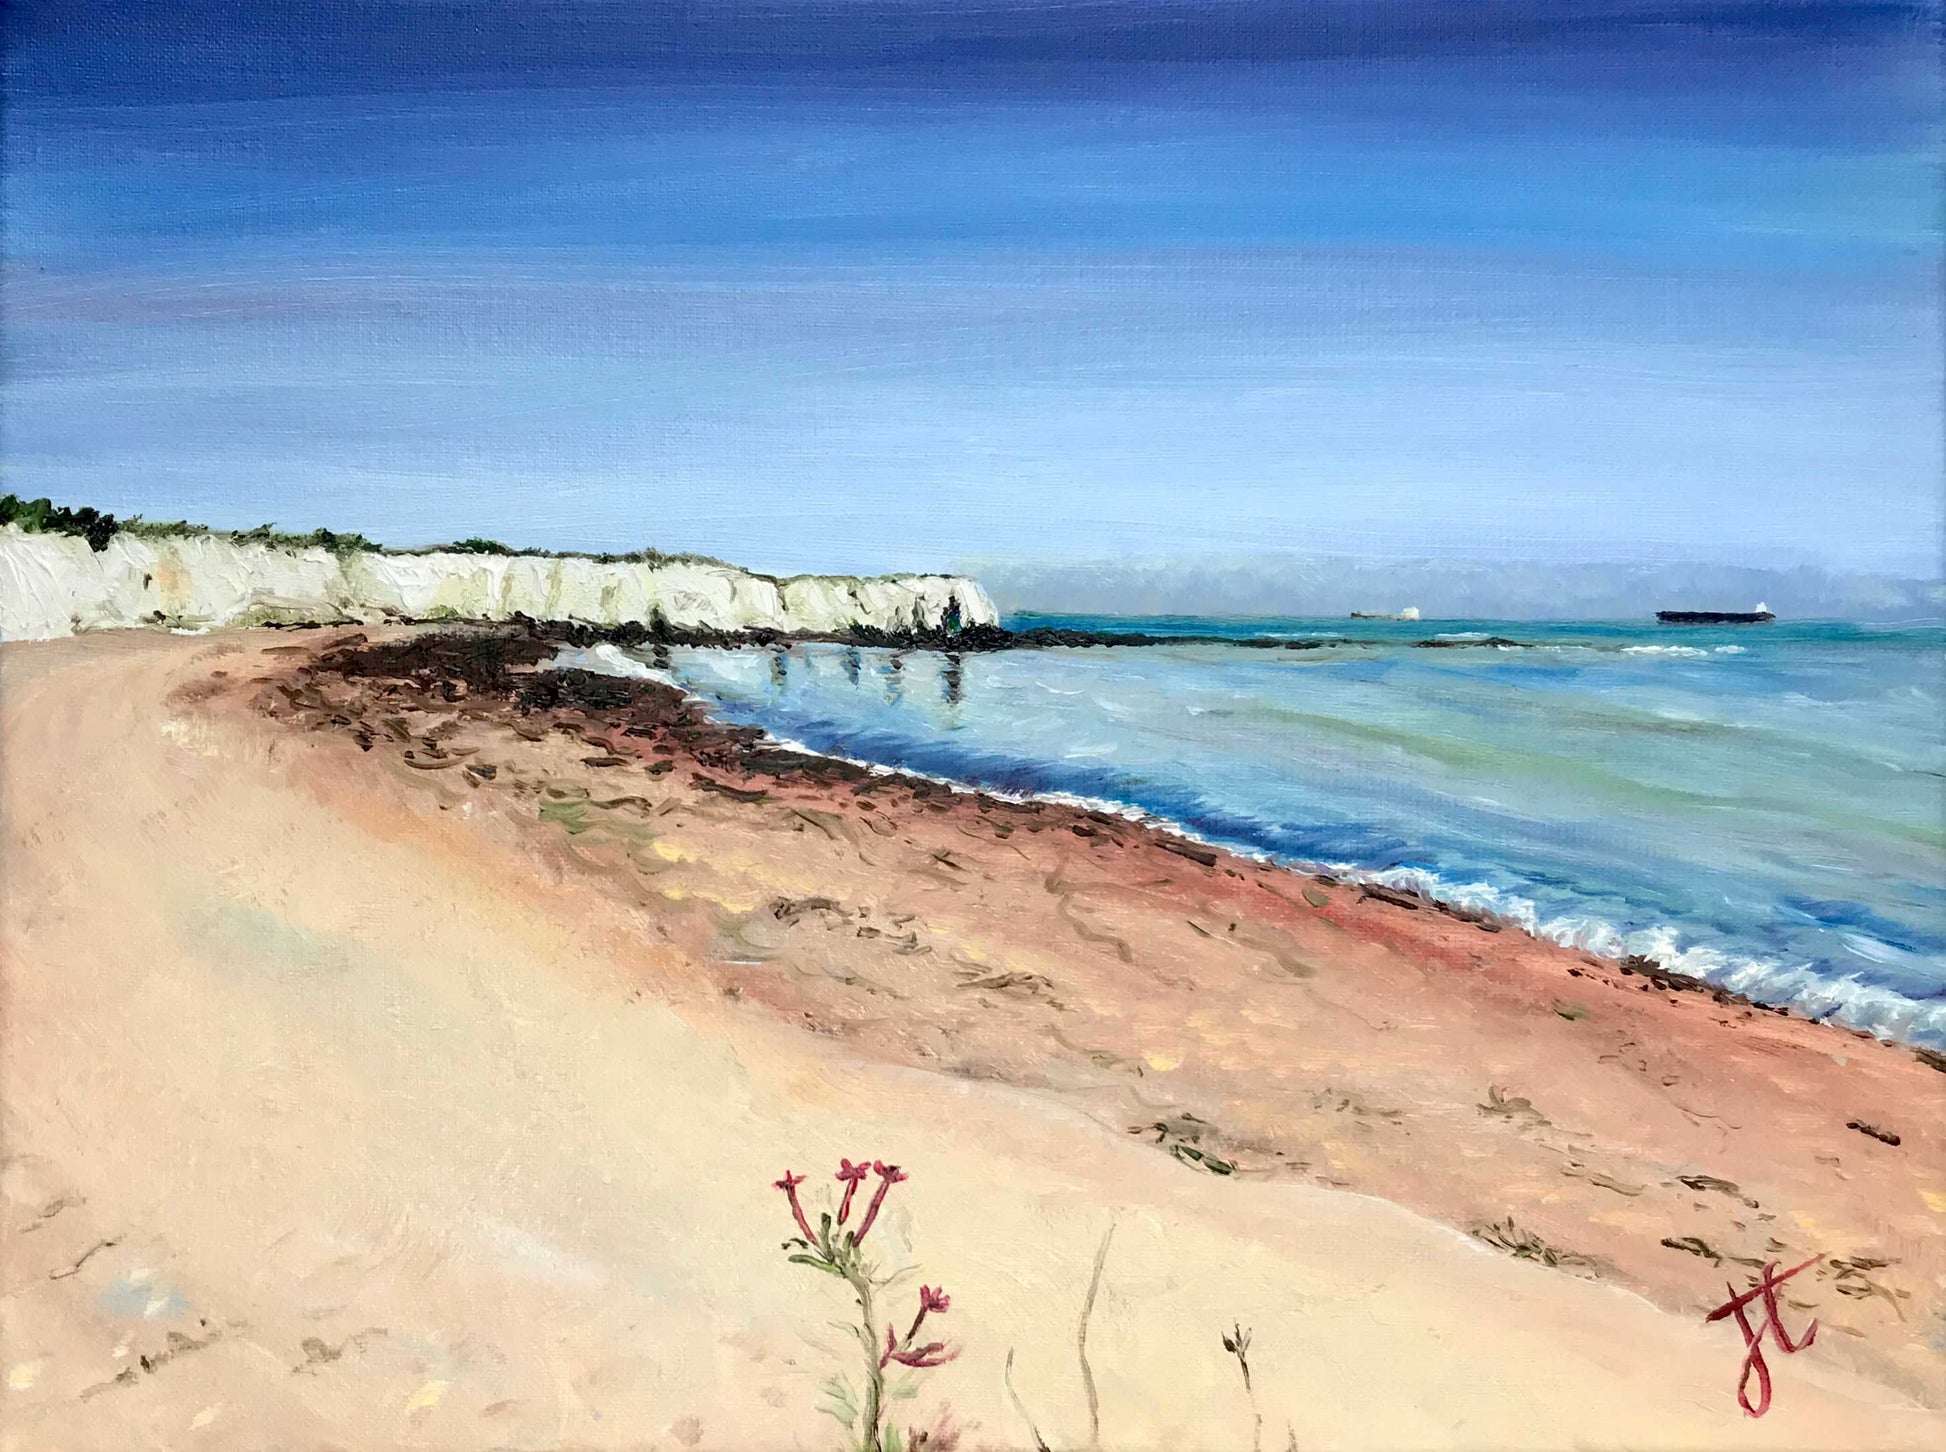 Painting cropped to edges: beach scene looking across sand towards white outcrop. There is a ship in the distance. A few flowers in the foreground suggest that the viewer is standing on a hill above the beach.